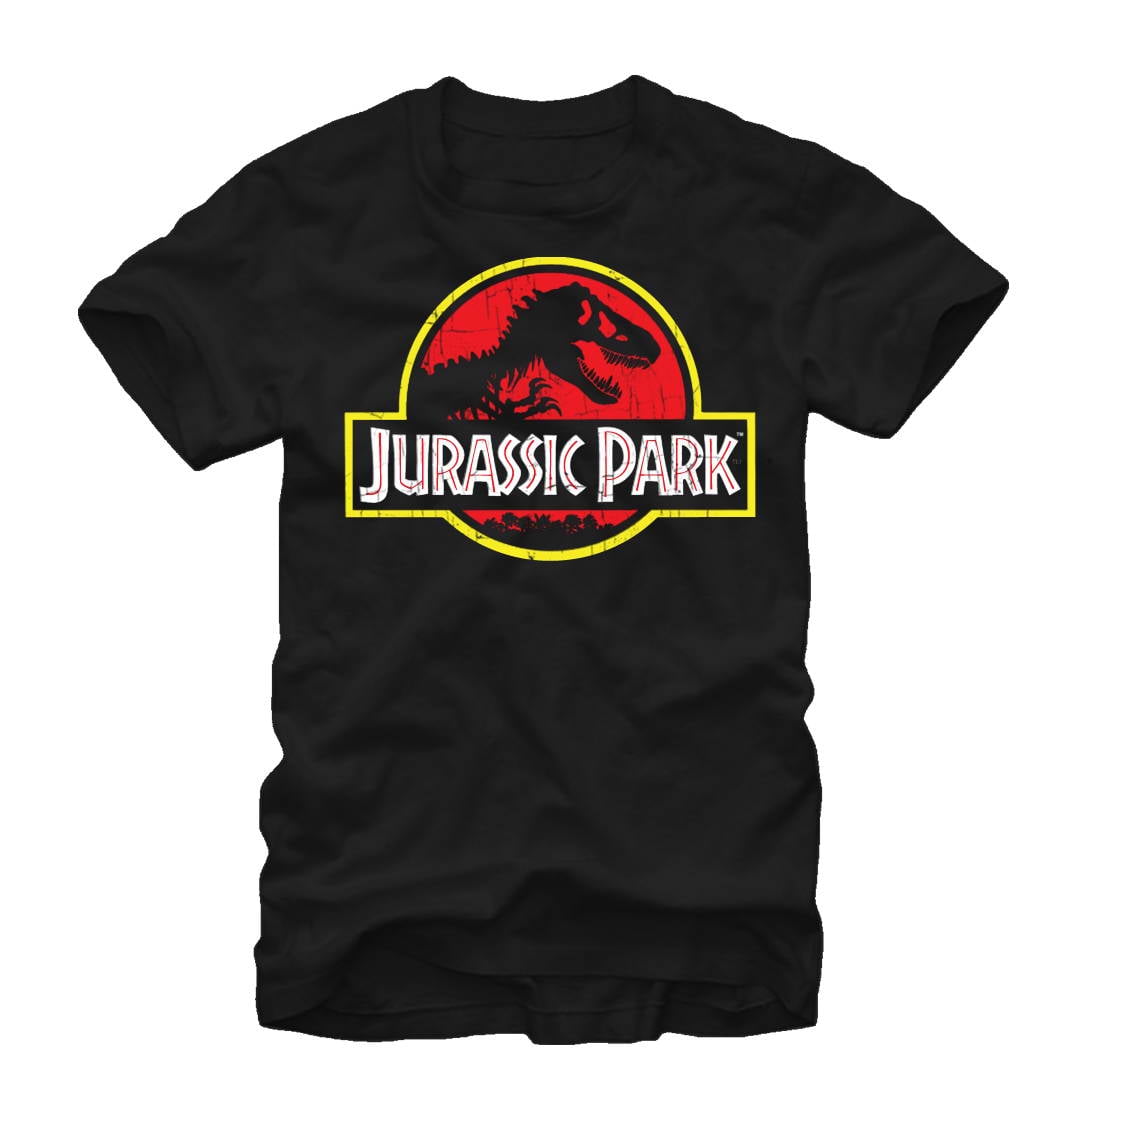 Jurassic Park Movie CLASSIC LOGO Licensed Adult T-Shirt All Sizes